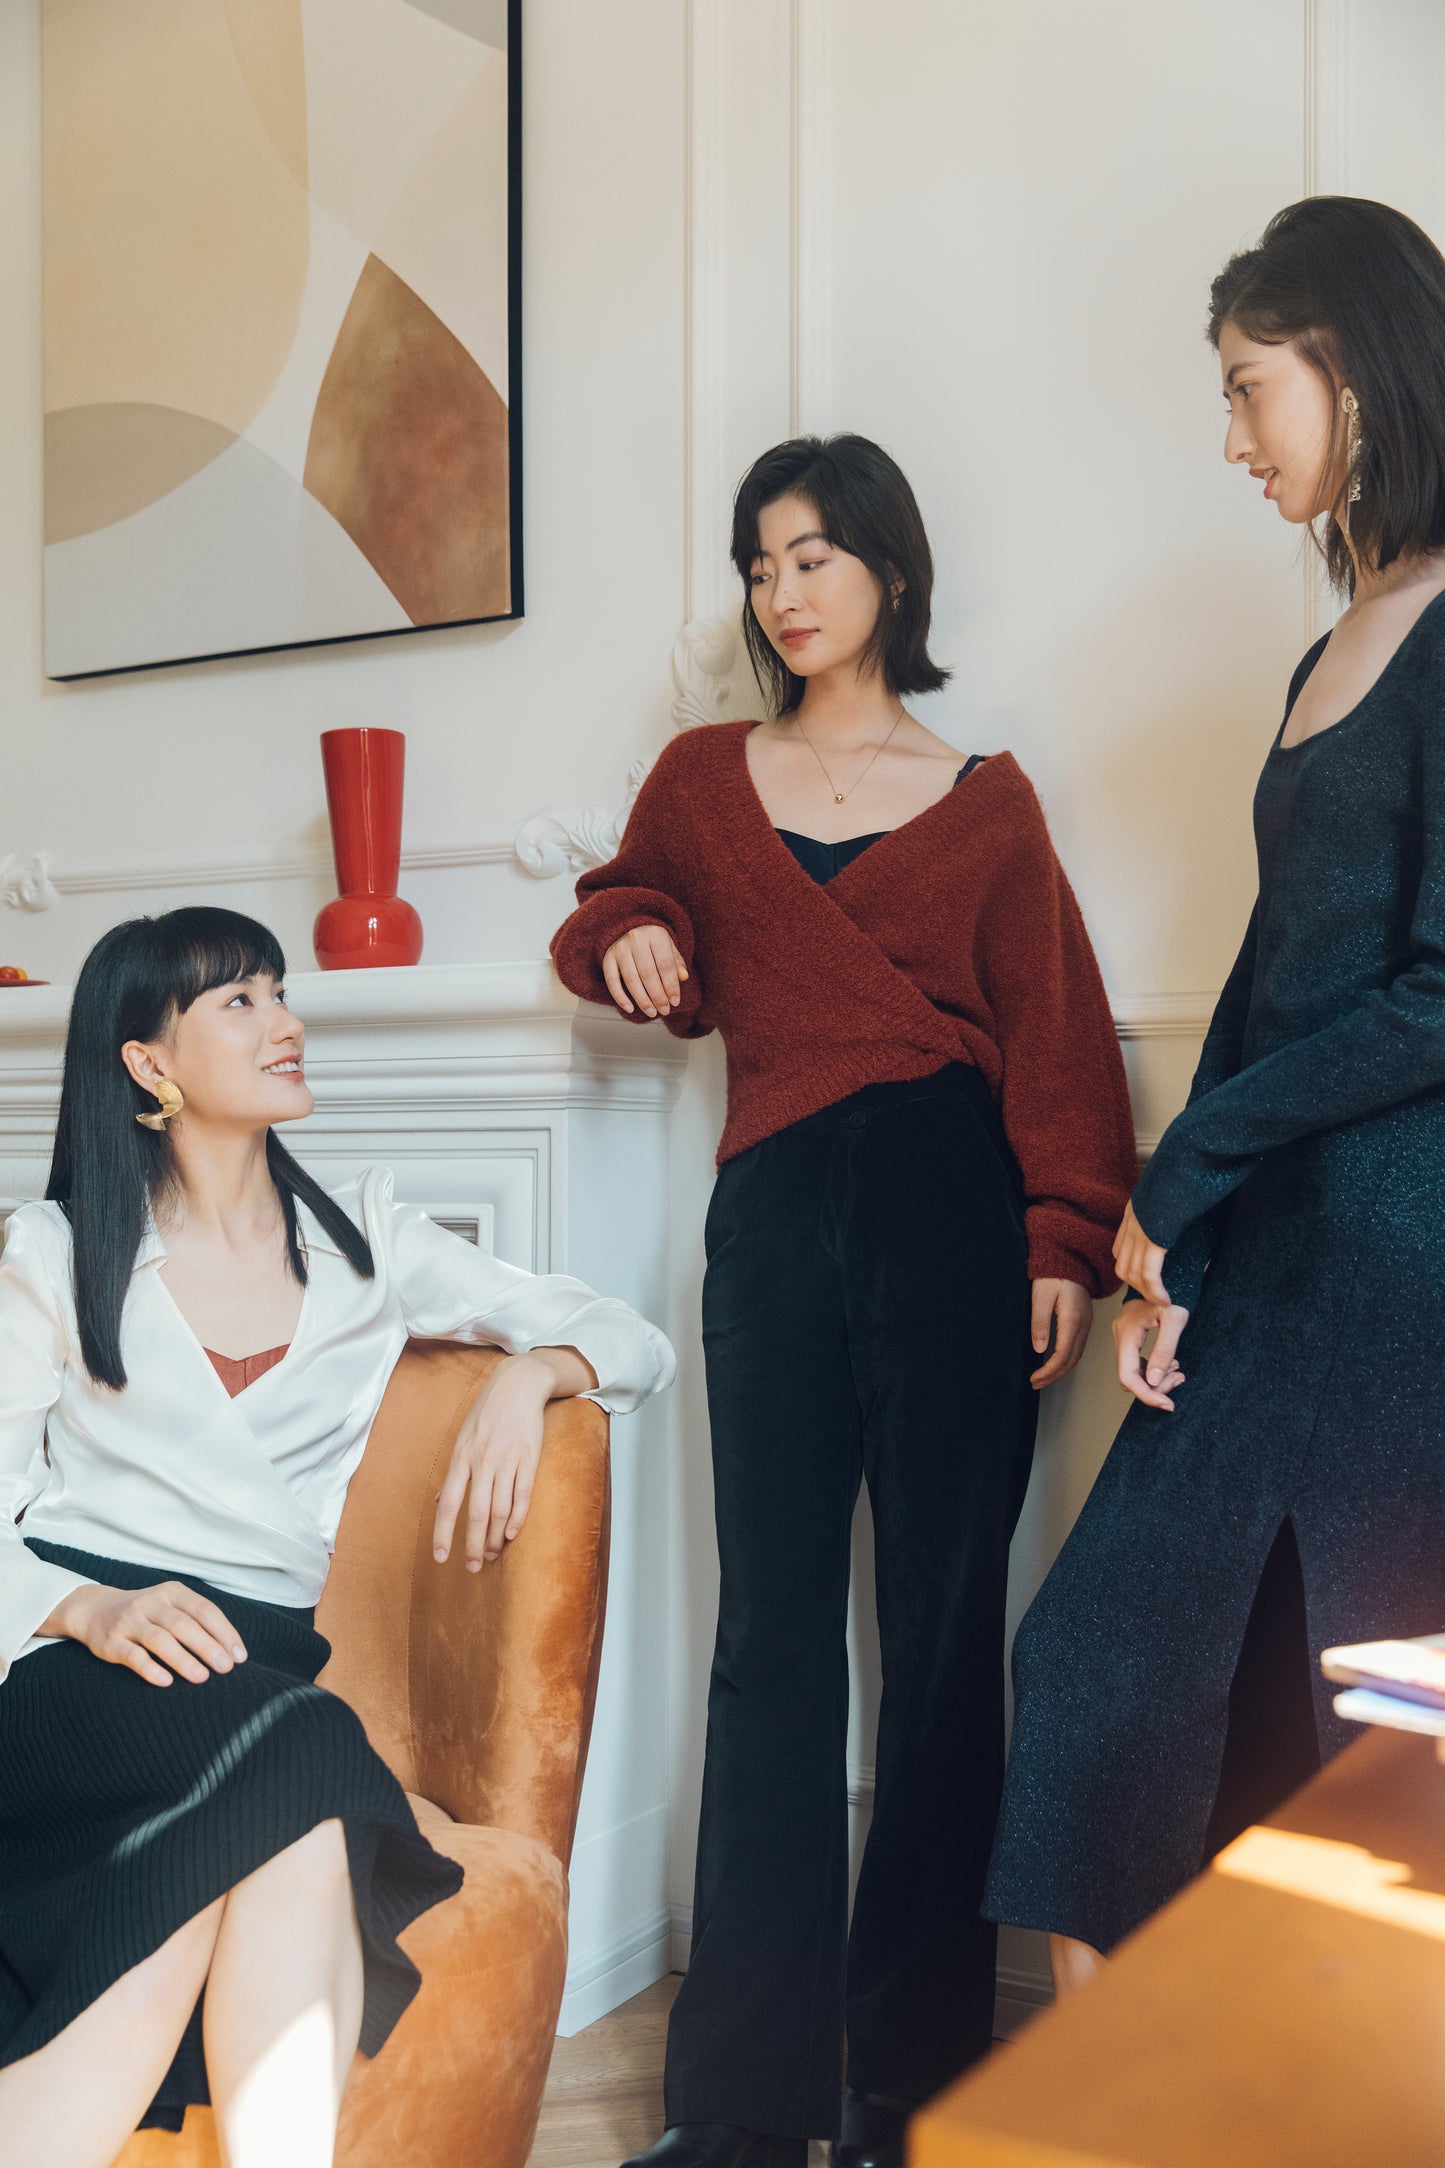 three woman in a living room, two standing and one sitting. Sitting one wearing white satin shirt and black skirt. Middle one standing wearing red cardigan and black pants. Right one standing wearing navy dress